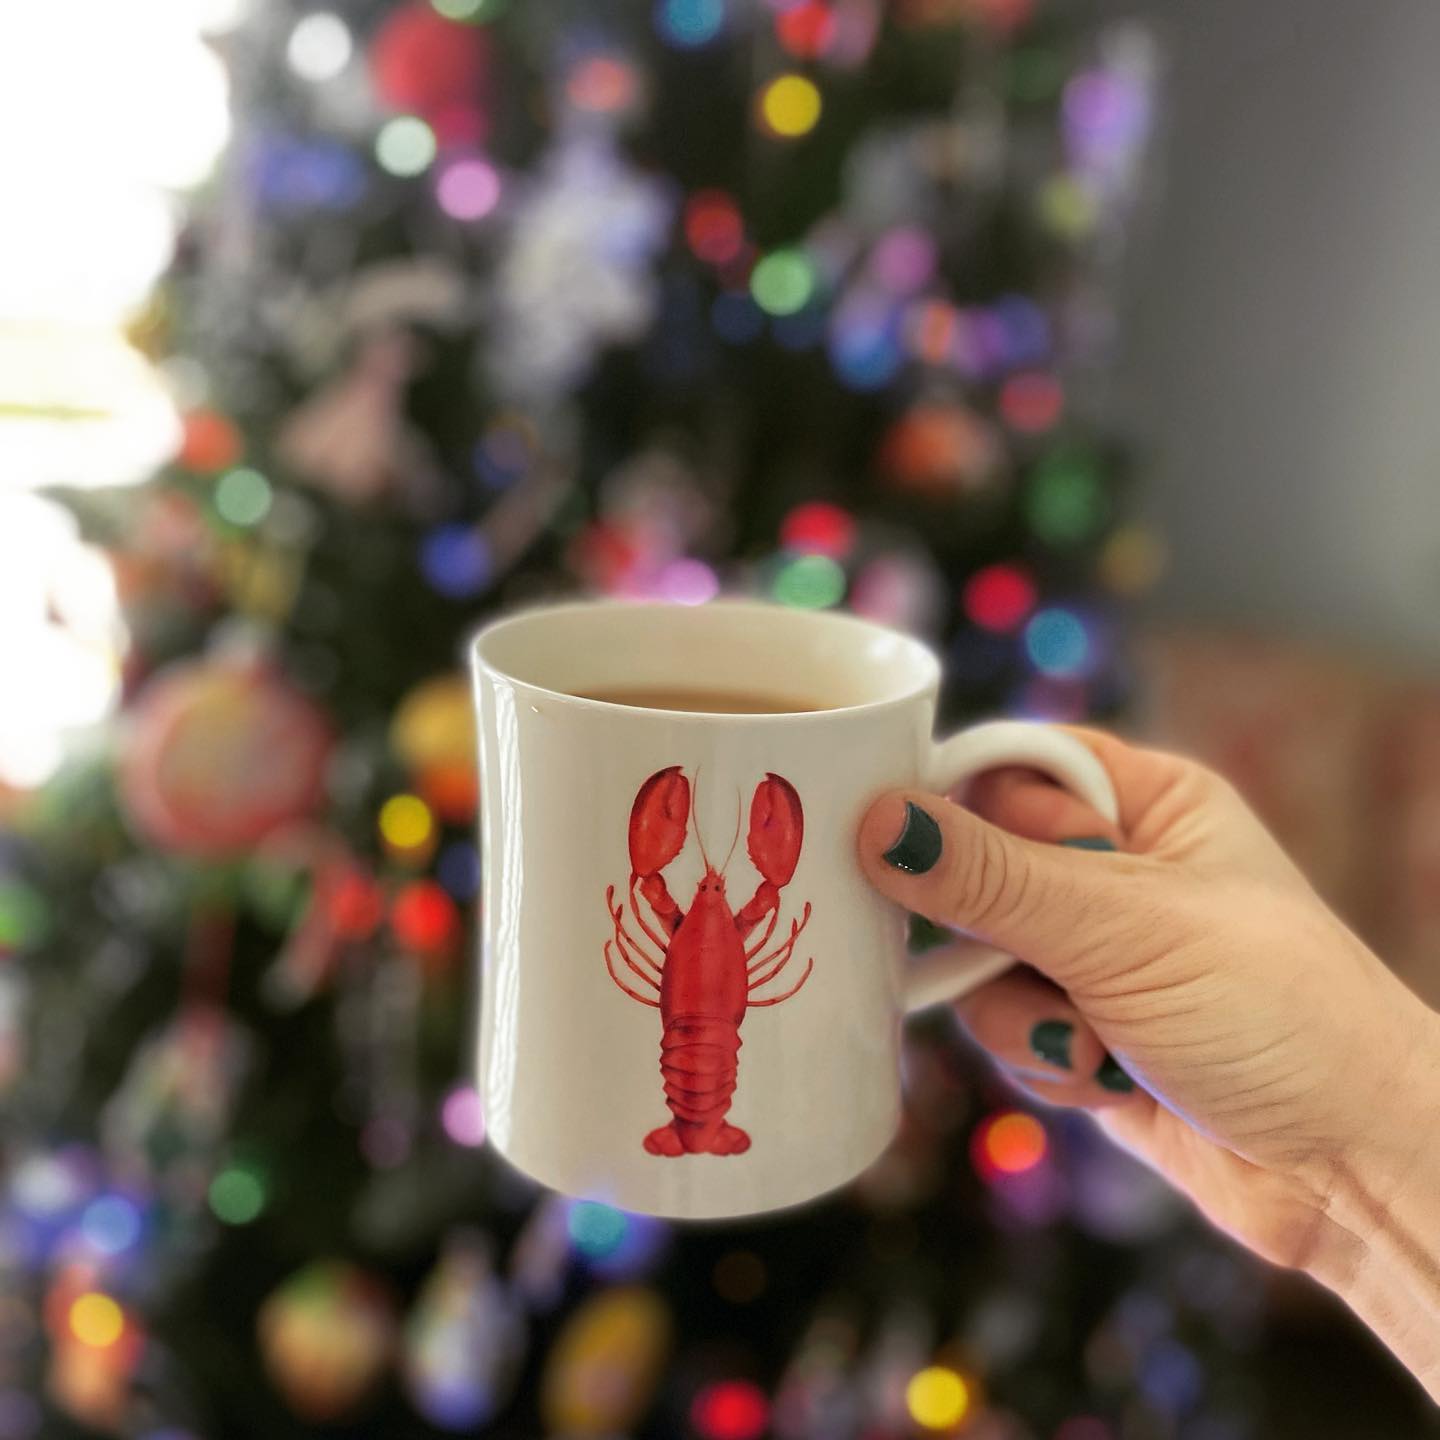 My favorite Christmas gift, purchased locally at @walker_lodenltd. #lobster #madisonconnecticut